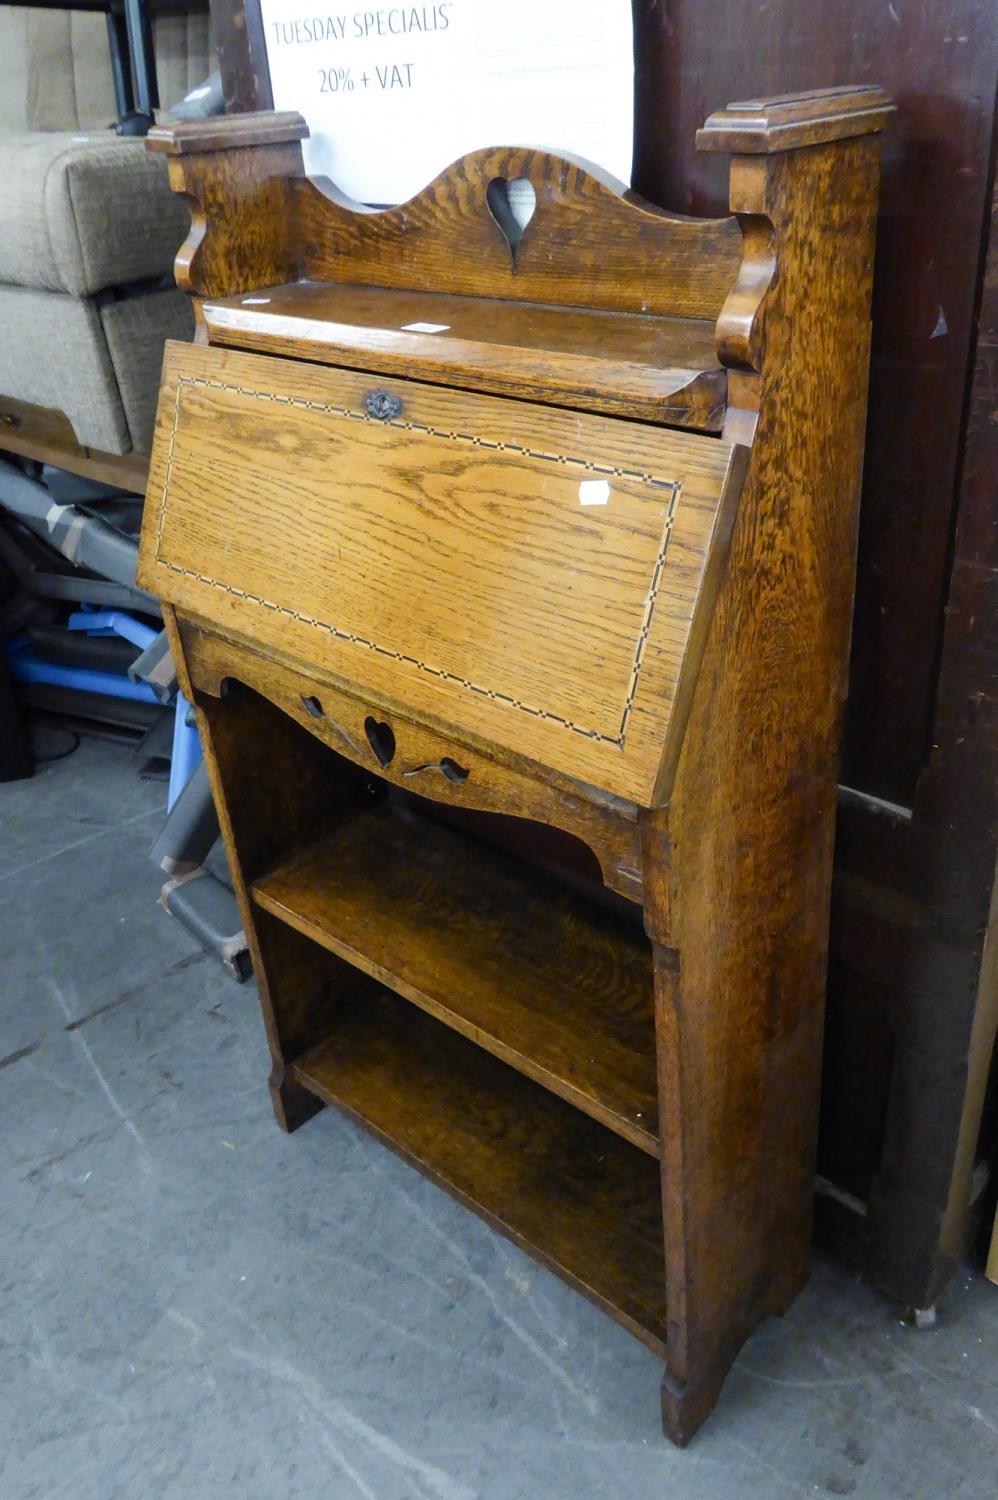 AN EDWARDIAN ARTS AND CRAFTS INLAID OAK BUREAU, WITH TWO OPEN SHELVES BELOW